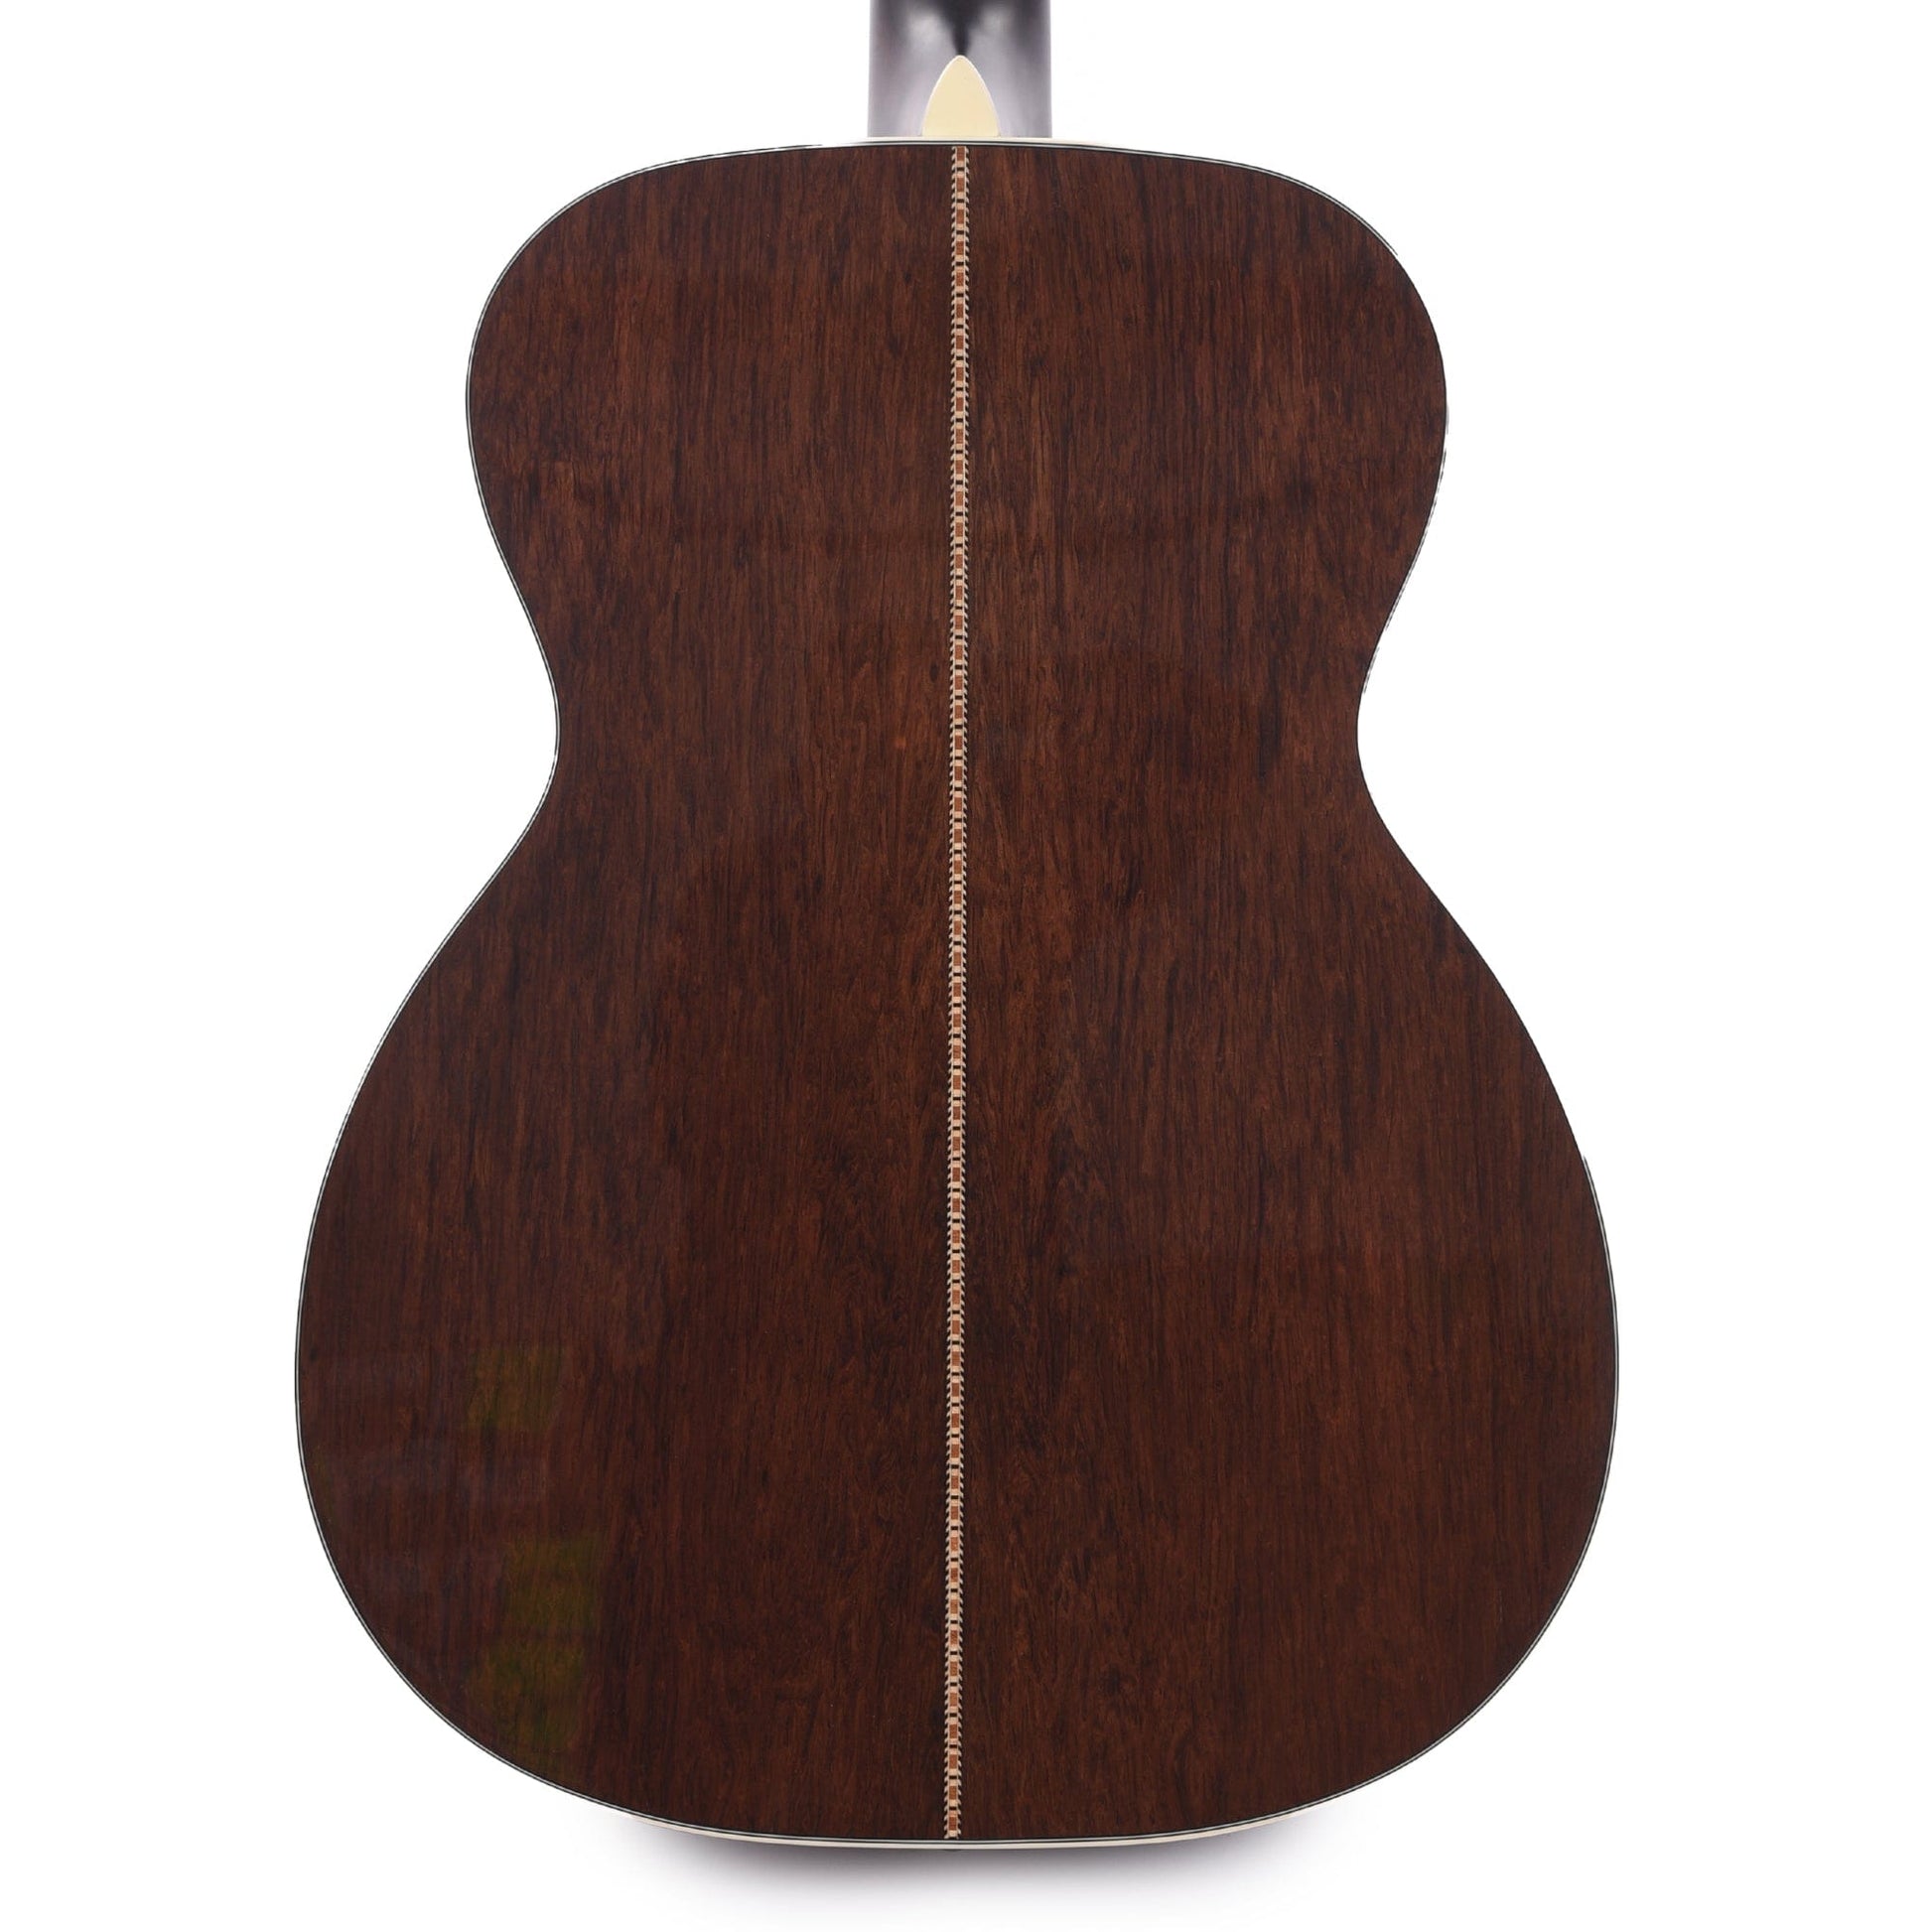 Eastman E20OM Madagascar Thermo Cured Adirondack Spruce/Rosewood Natural Acoustic Guitars / OM and Auditorium